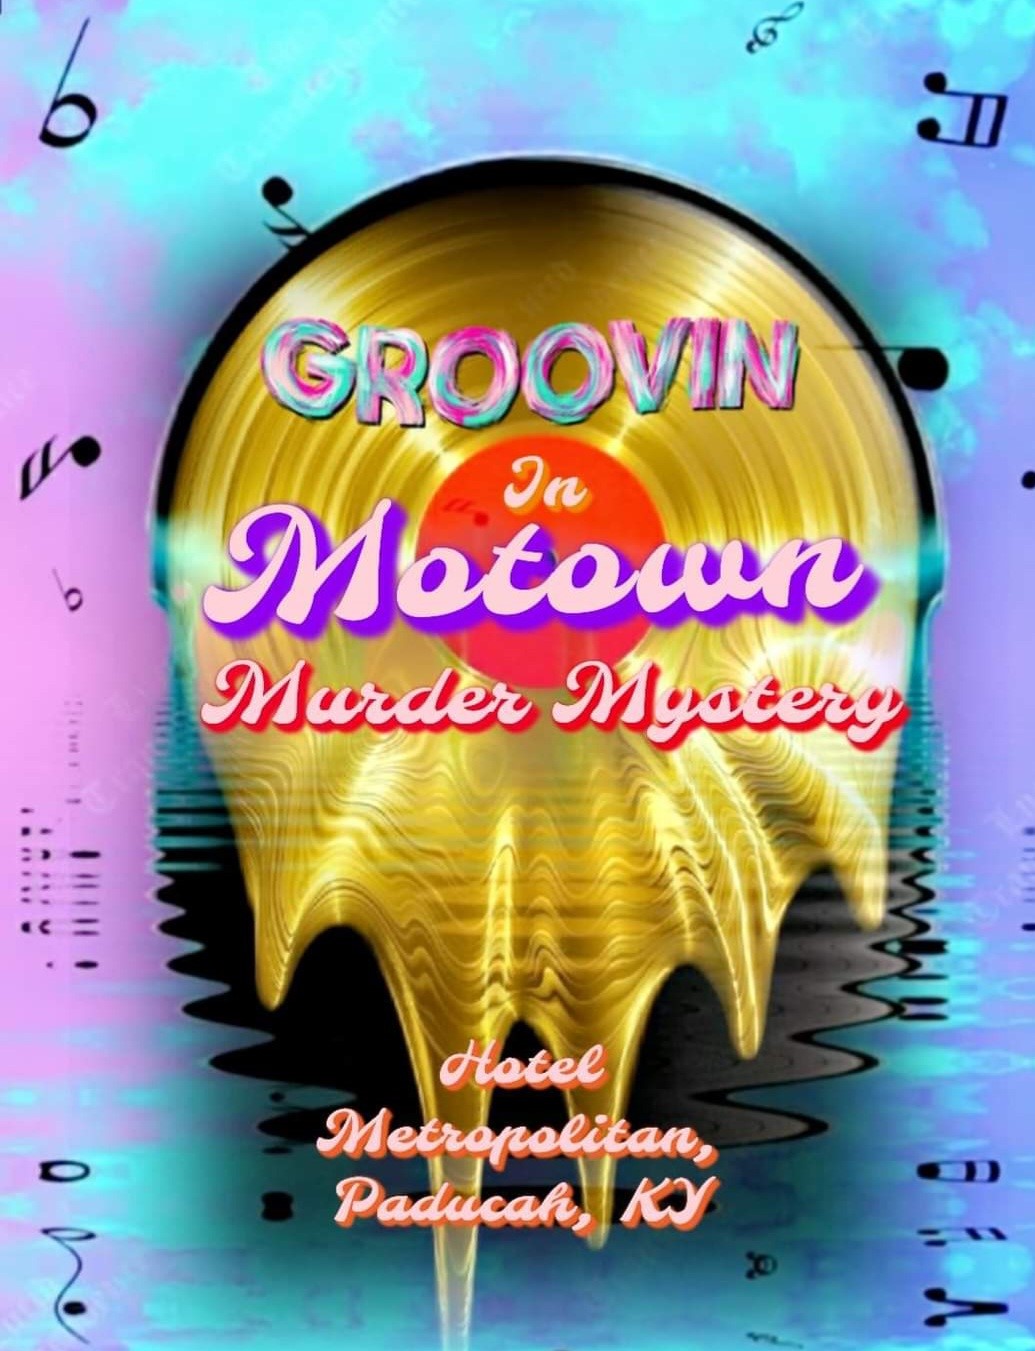 Groovin In MoTown Murder Mystery Event on Sep 10, 17:00@Hotel Metropolitan - Pick a seat, Buy tickets and Get information on Thriller Events thriller.events